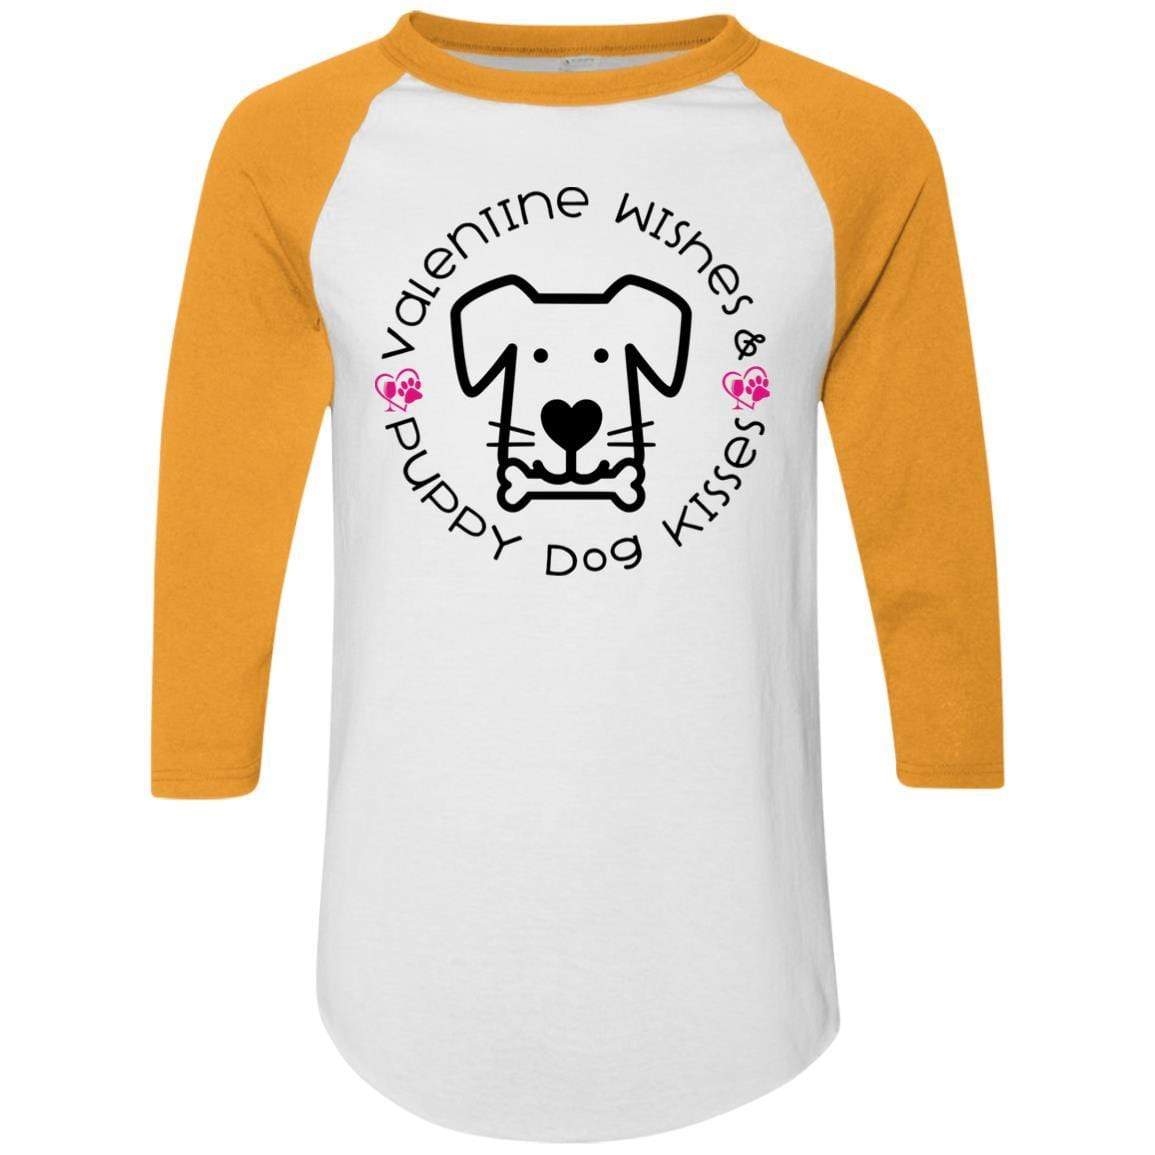 T-Shirts White/Gold / S Winey Bitches Co 'Valentine Wishes and Puppy Dog Kisses" (Dog) Colorblock Raglan Jersey WineyBitchesCo